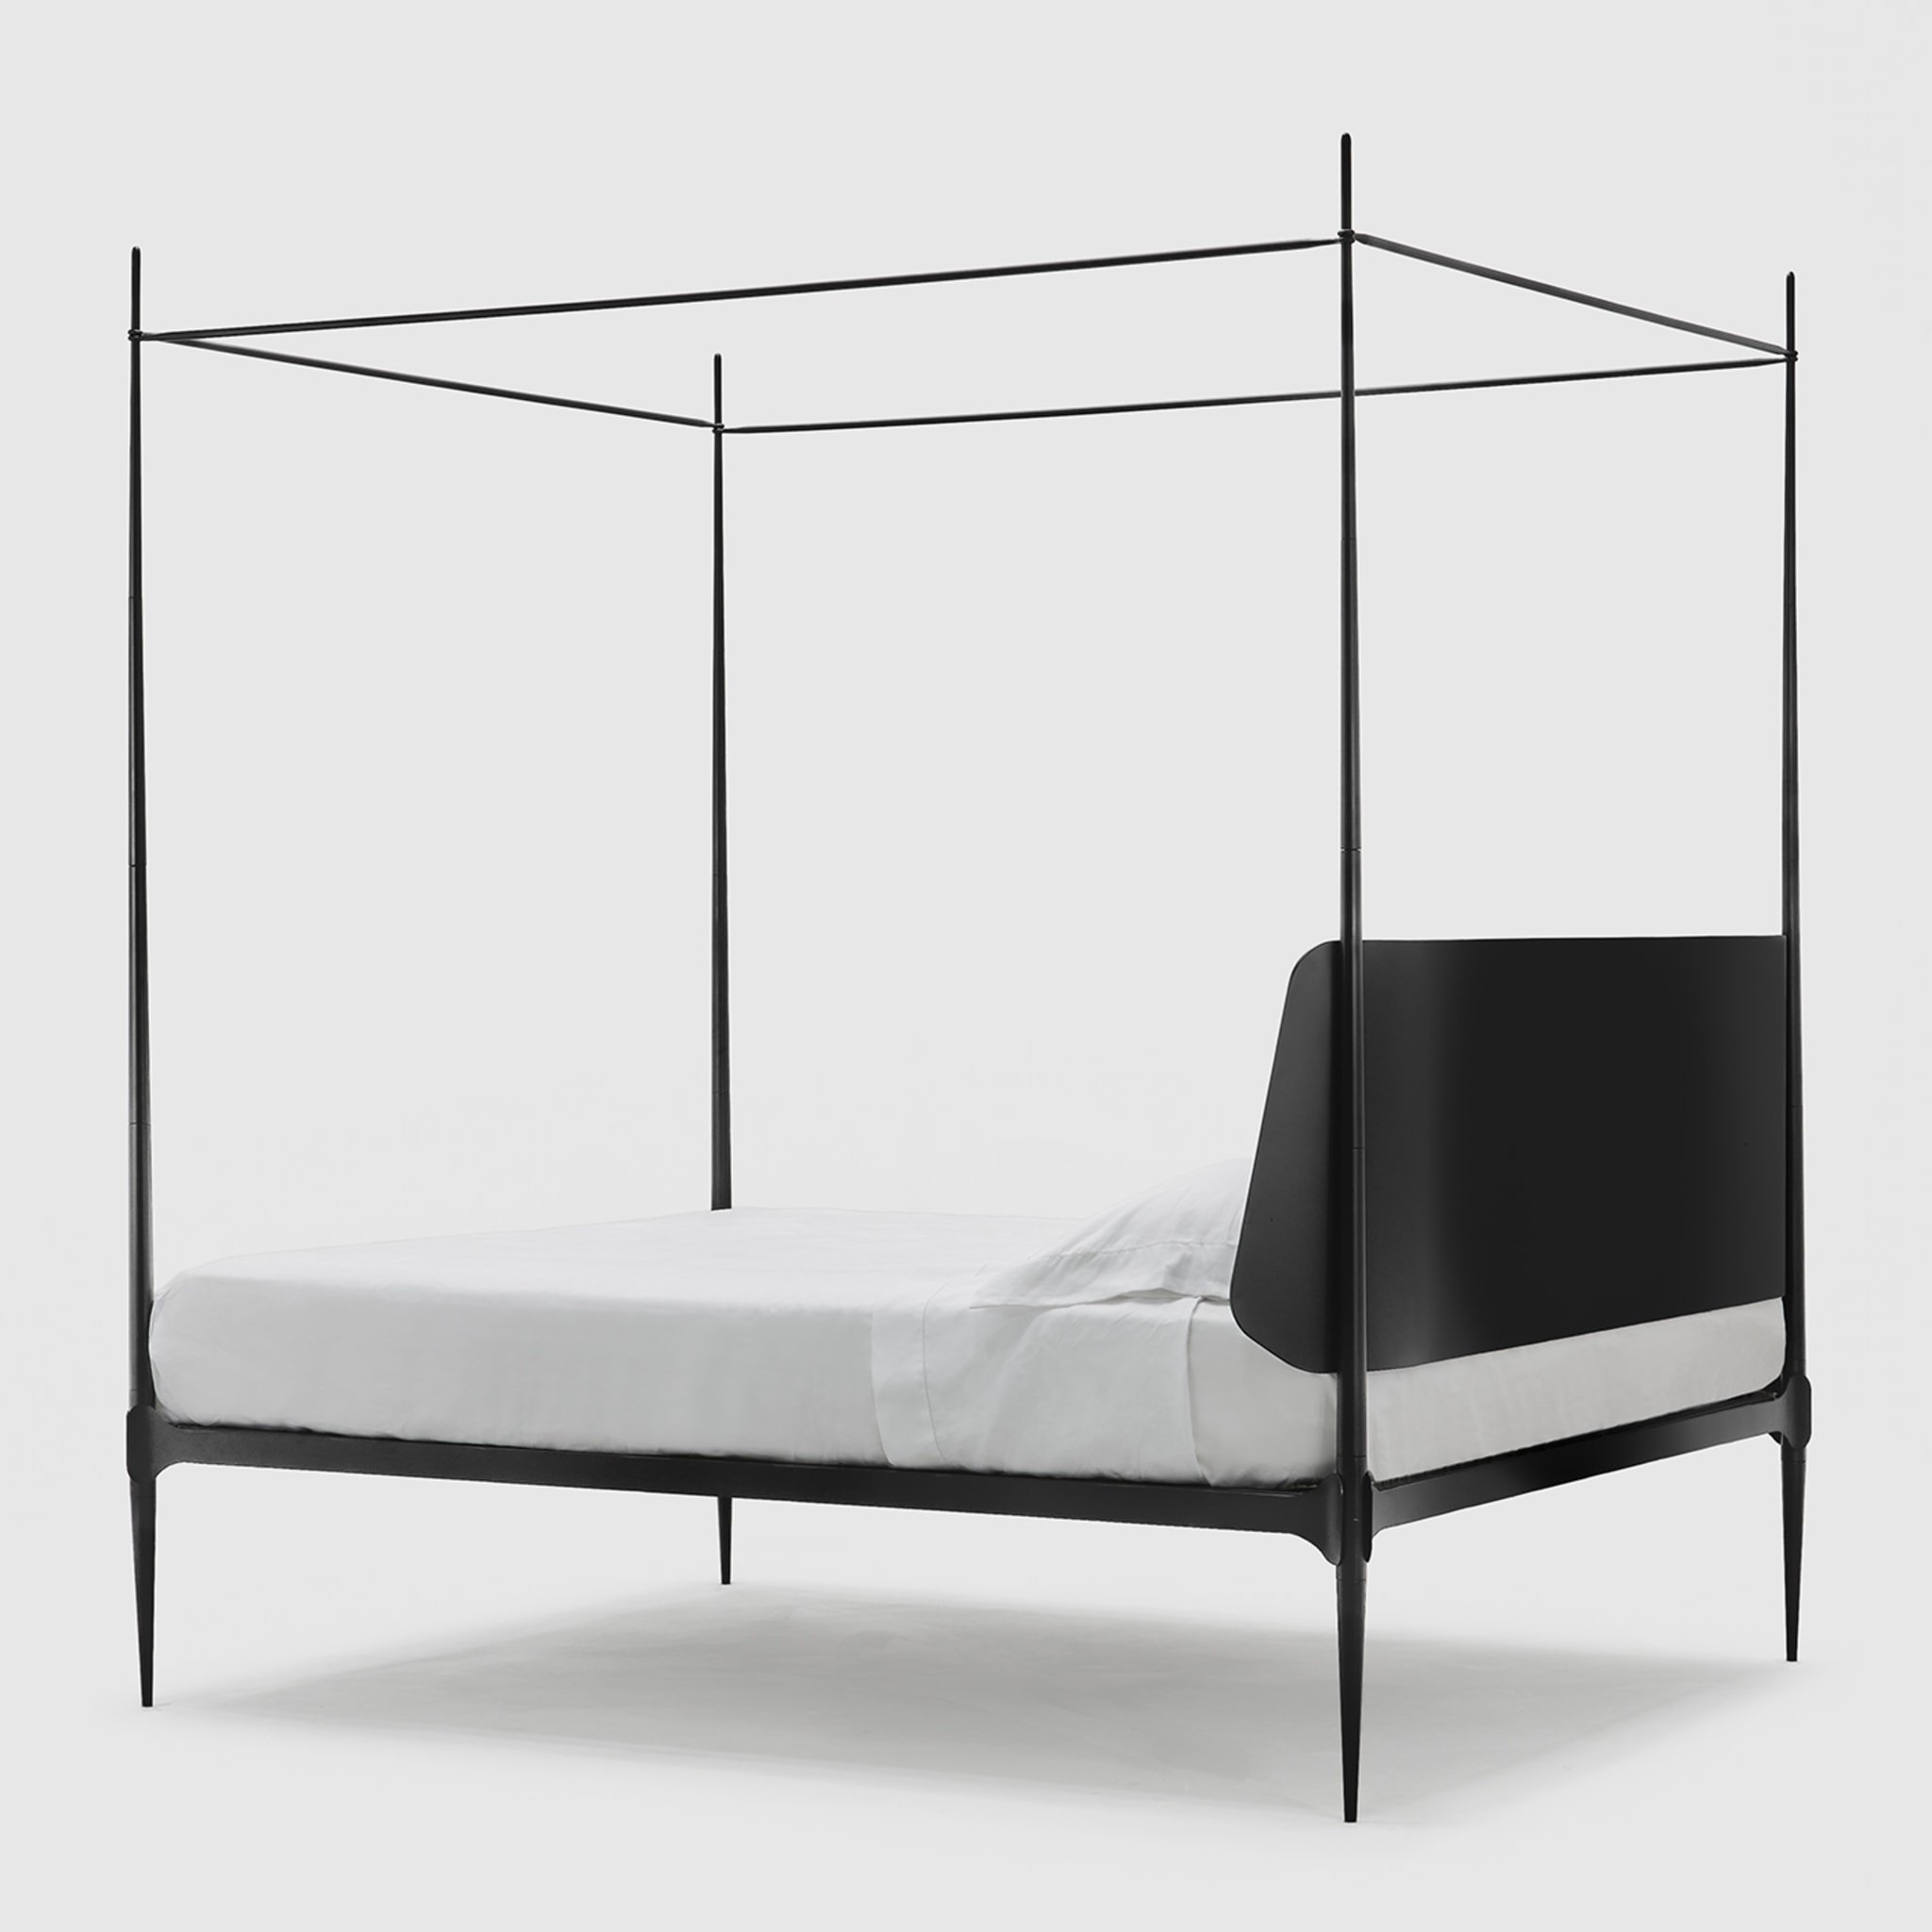 Clamp Bed By Francesco Forcellini - Alternative view 1